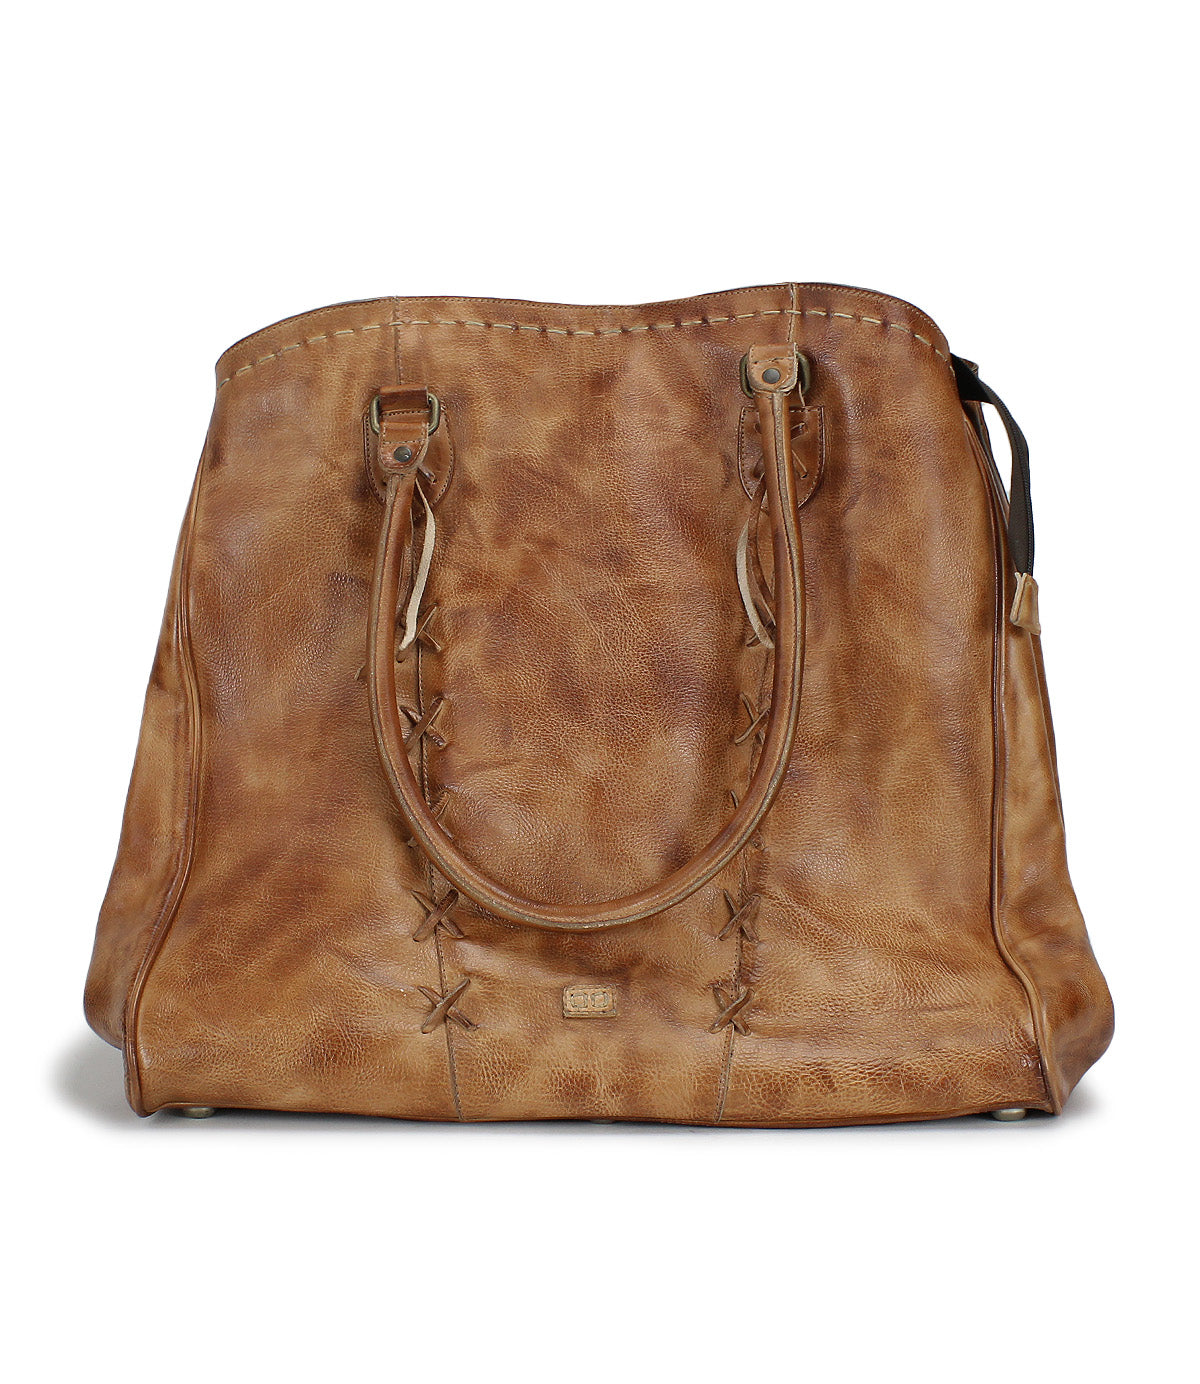 A Rebekah handbag by Bed Stu, made of tan leather with a strap.